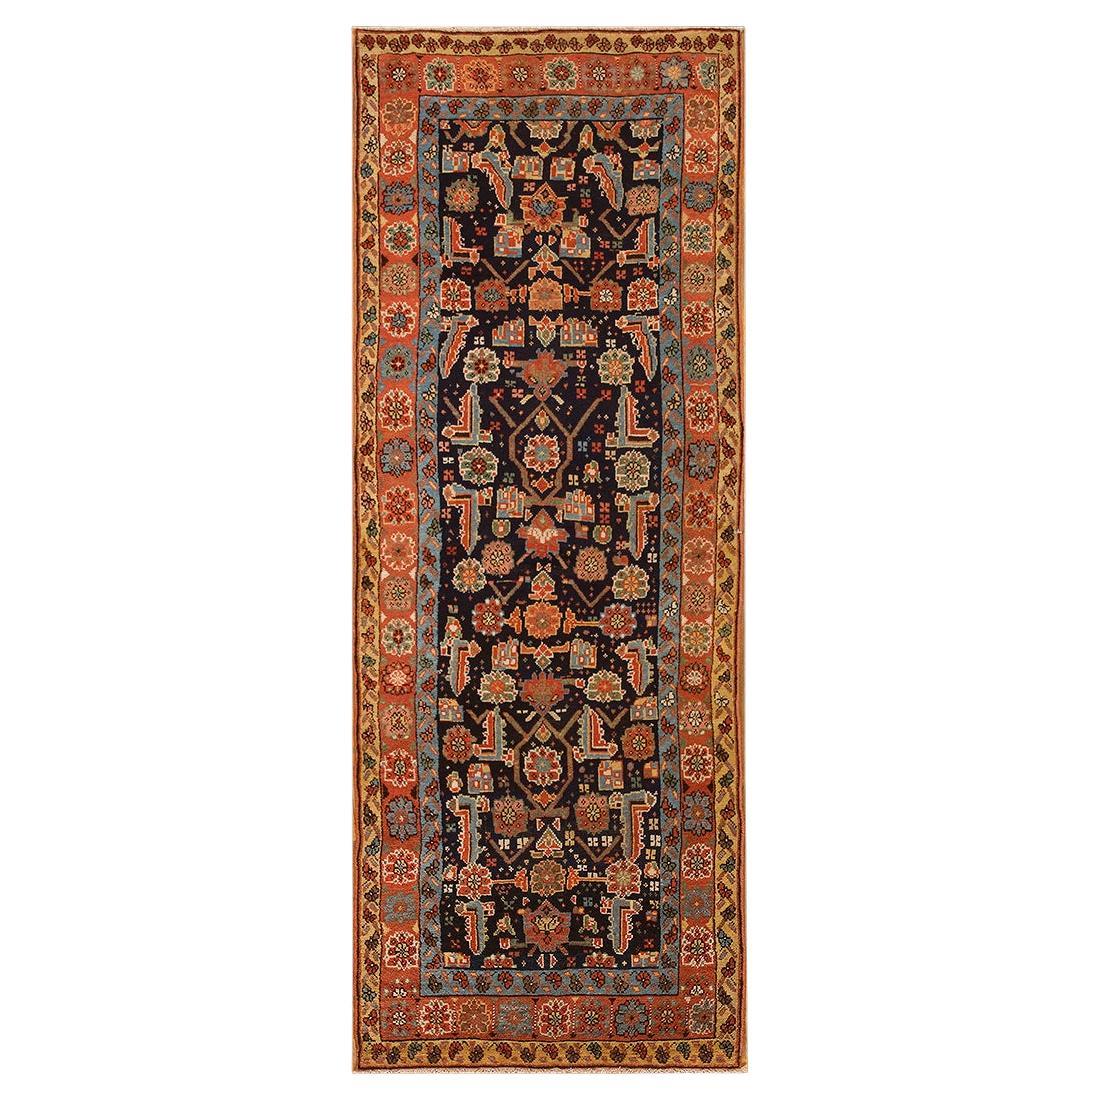 19th Century N.W. Persian Carpet ( 3'8" x 9' - 112 x 274 ) For Sale